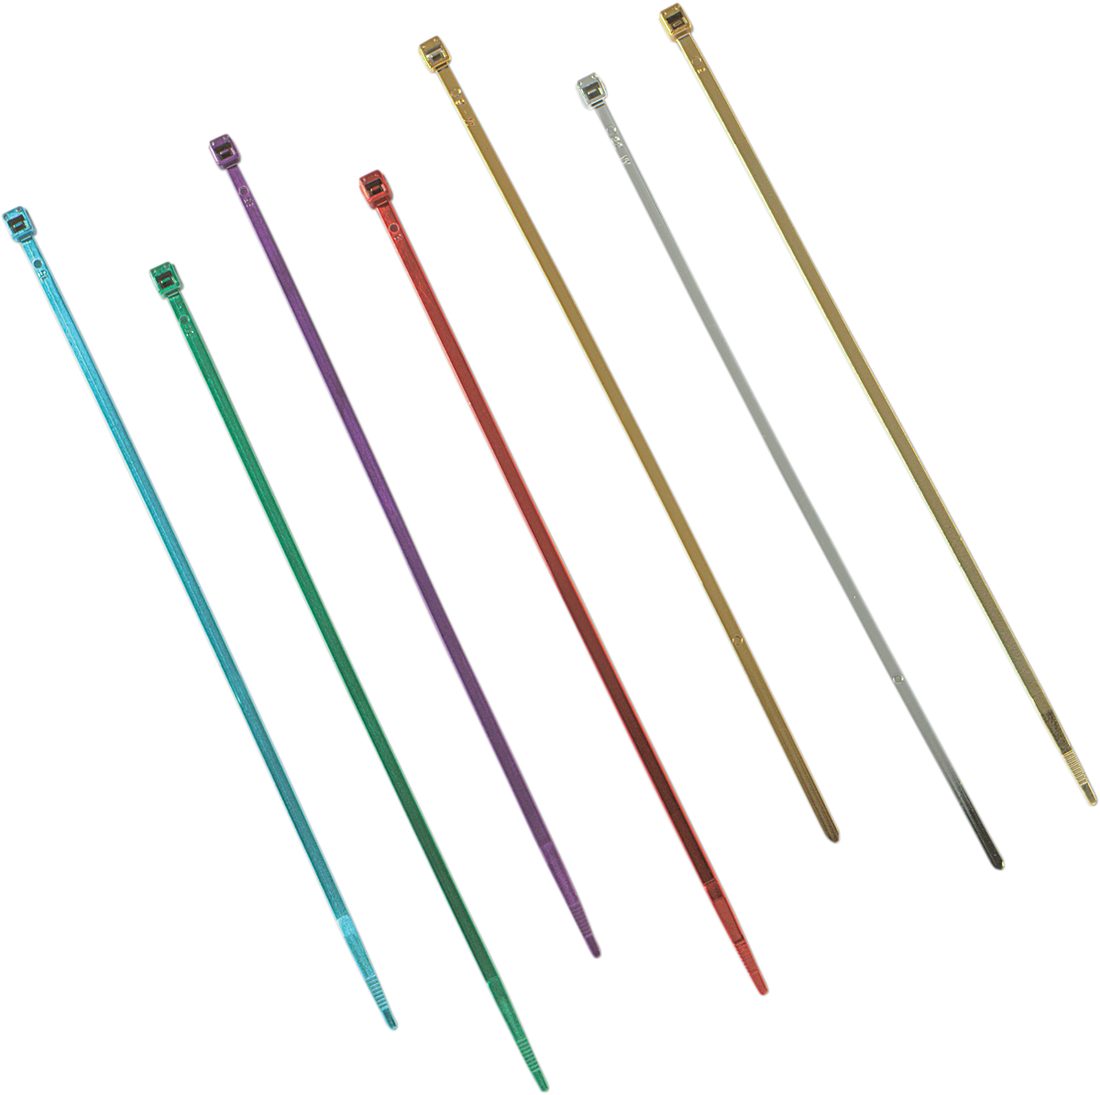 DS-193047 - DRAG SPECIALTIES Cable Tie - 7" - Chrome - 10-Pack 10-6010C-10-HC3